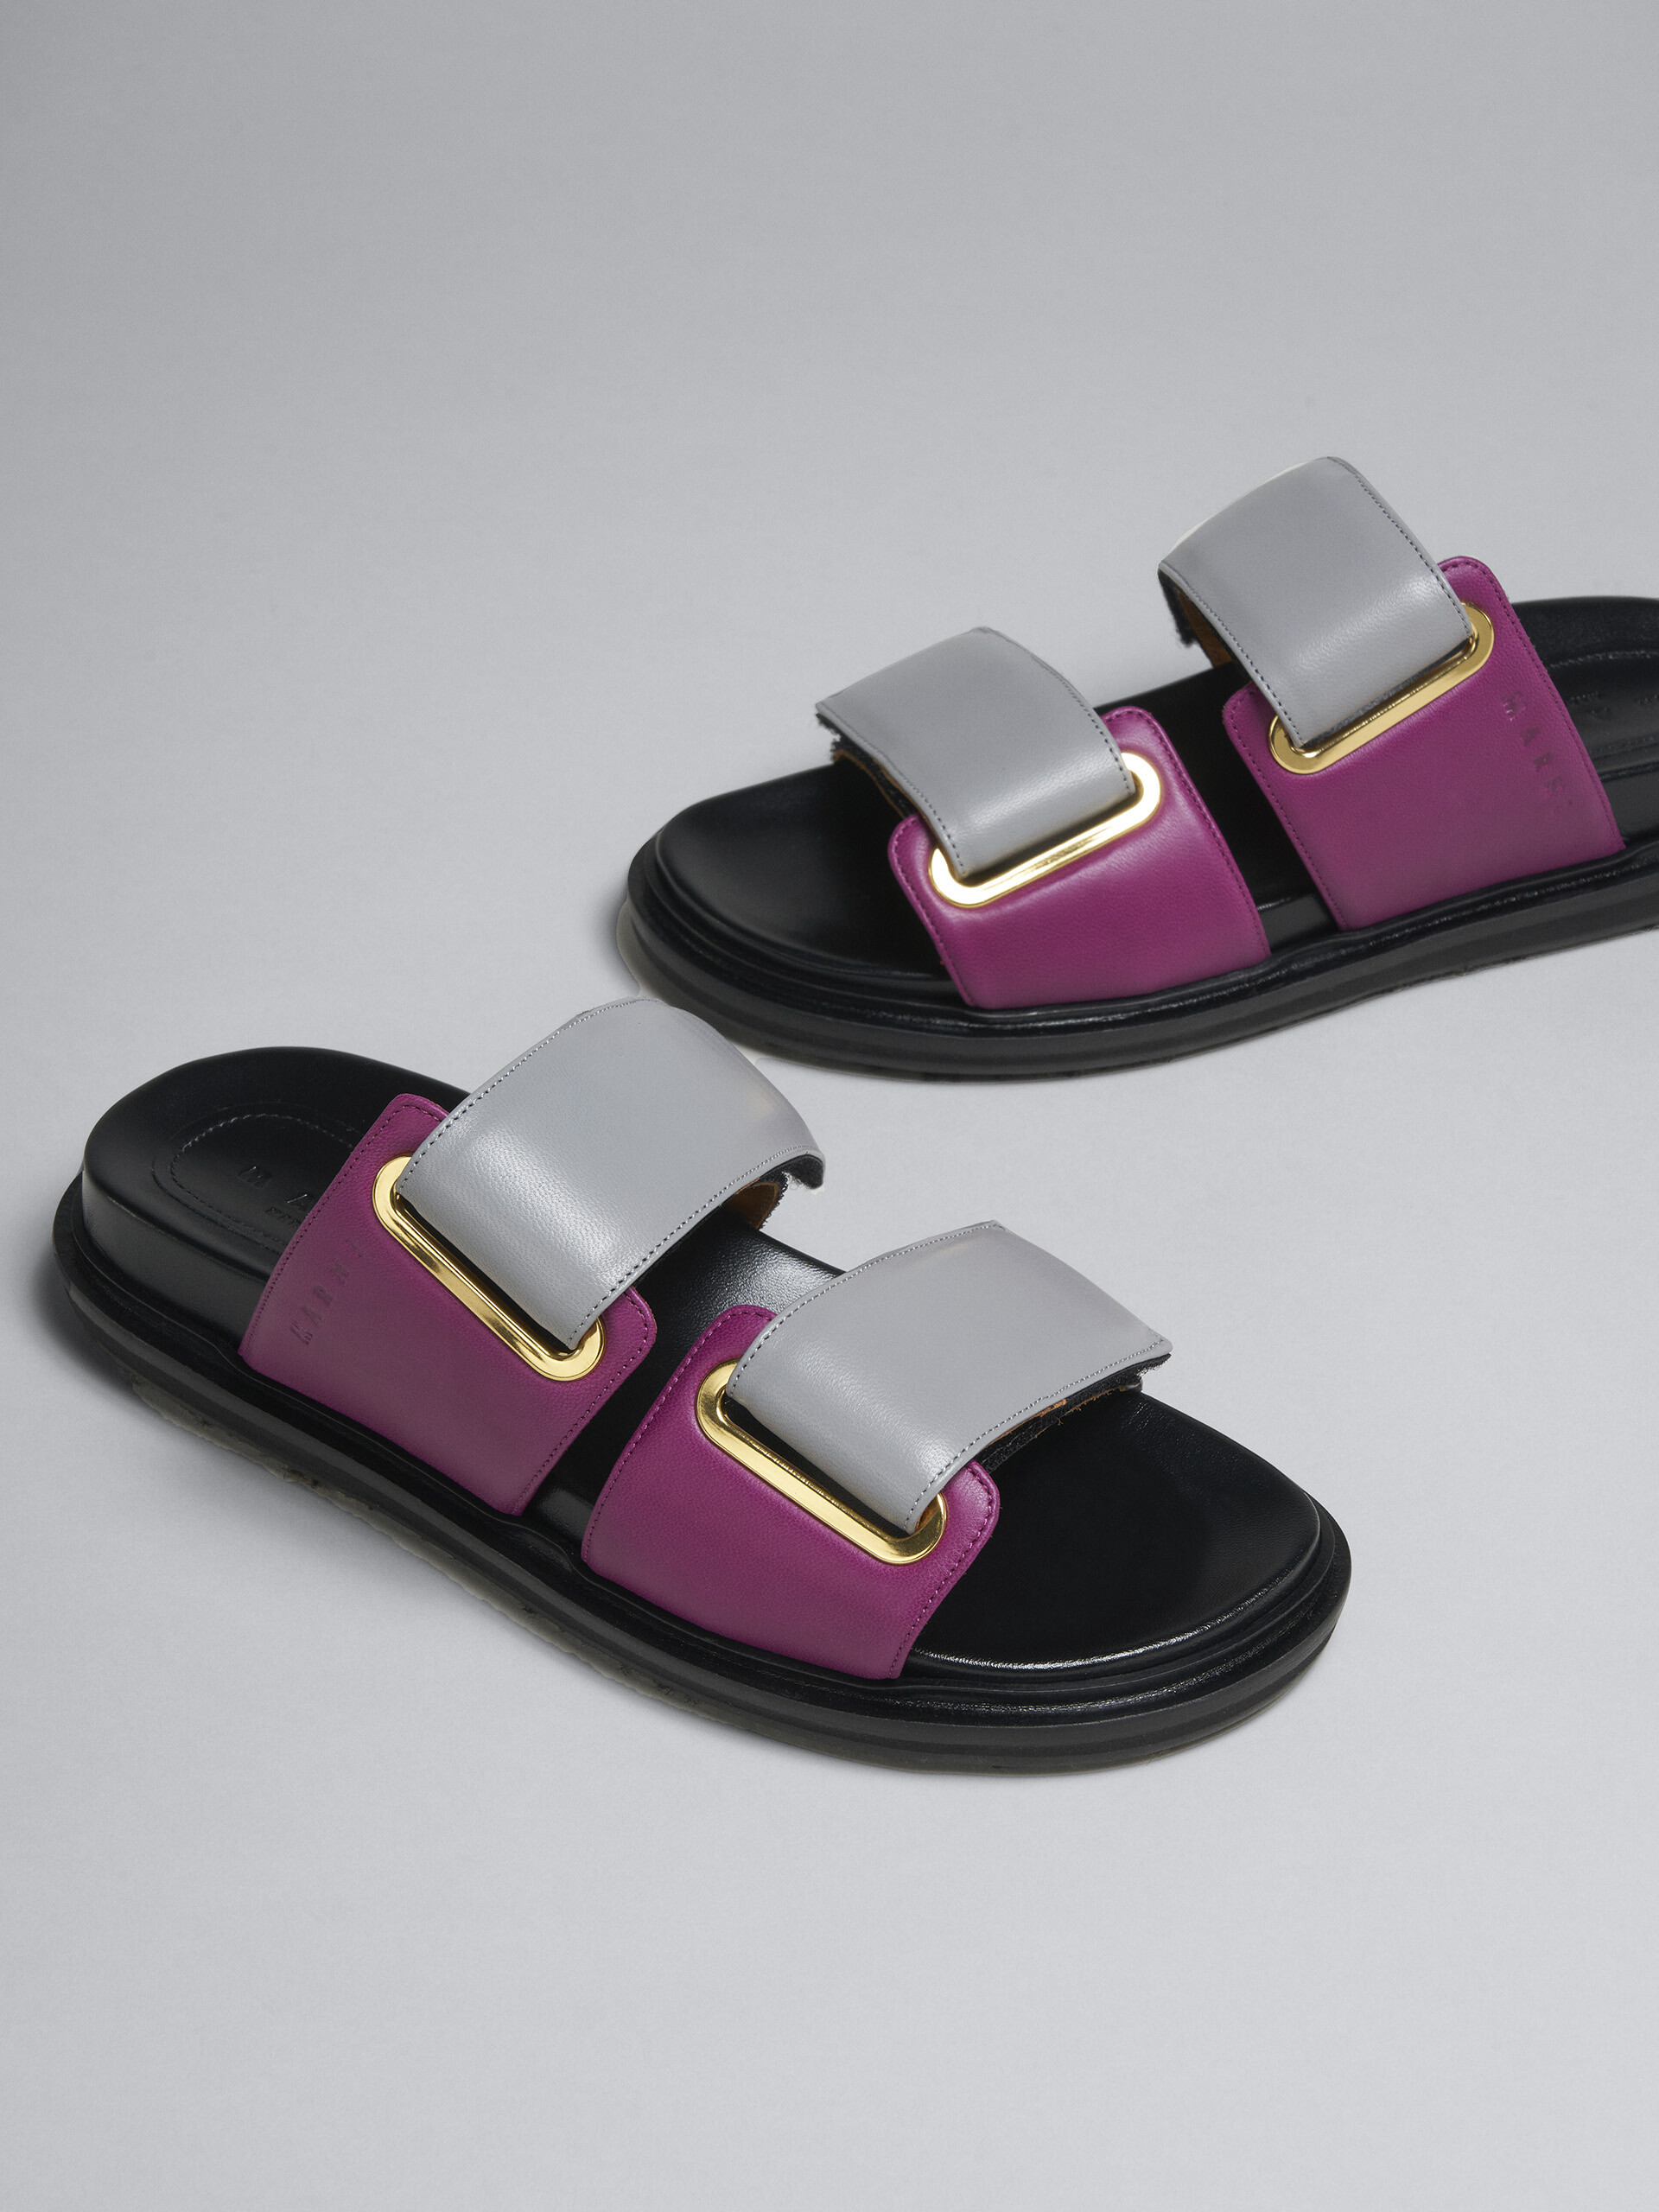 Grey and fucshia leather fussbett - Sandals - Image 5